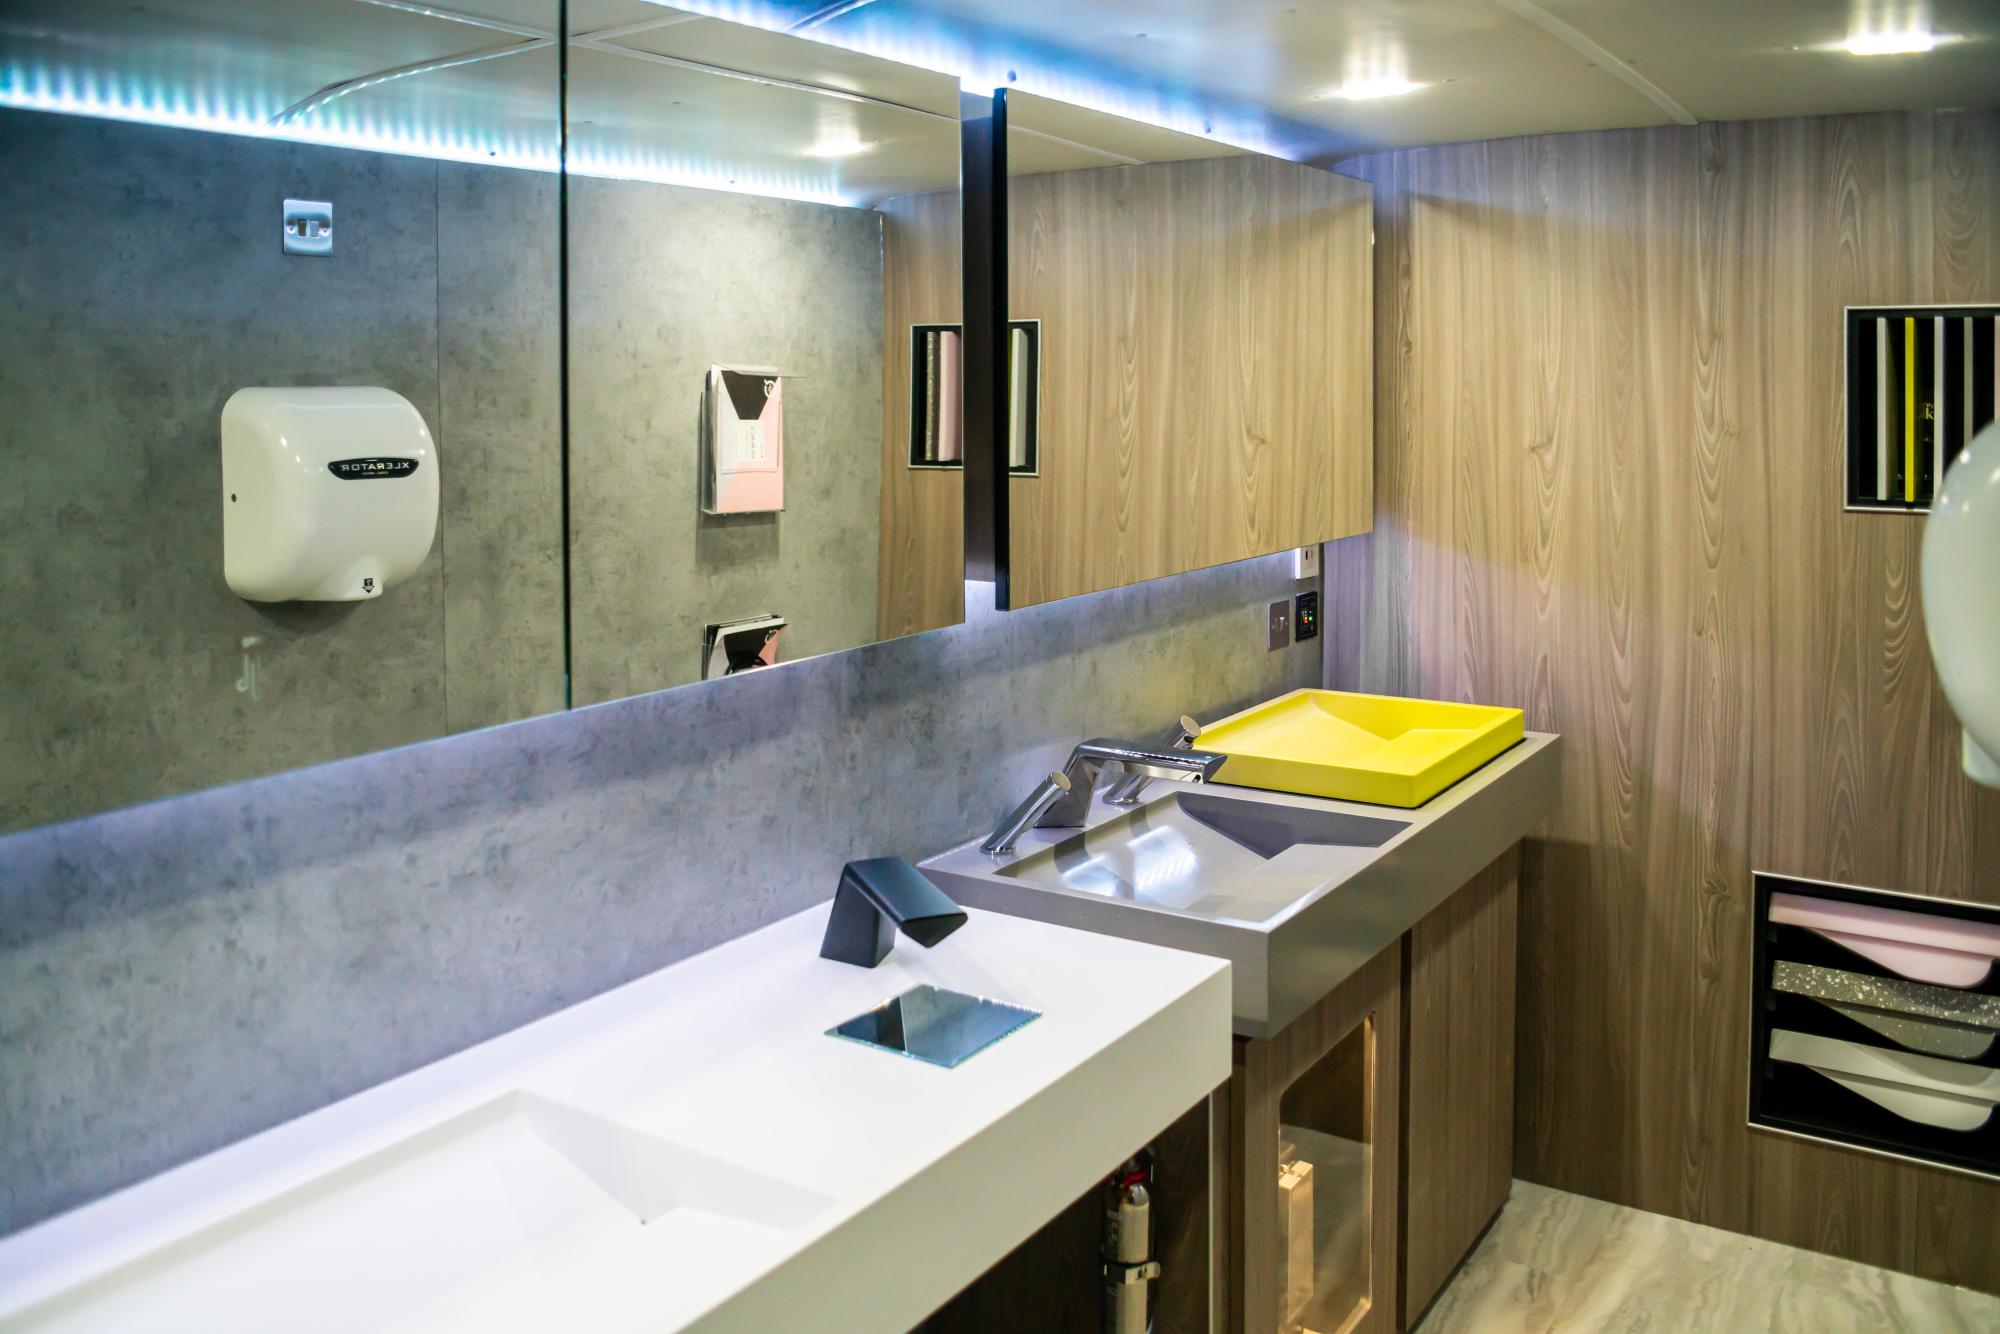 Public Toilets – What Makes a Great Washroom User Experience?